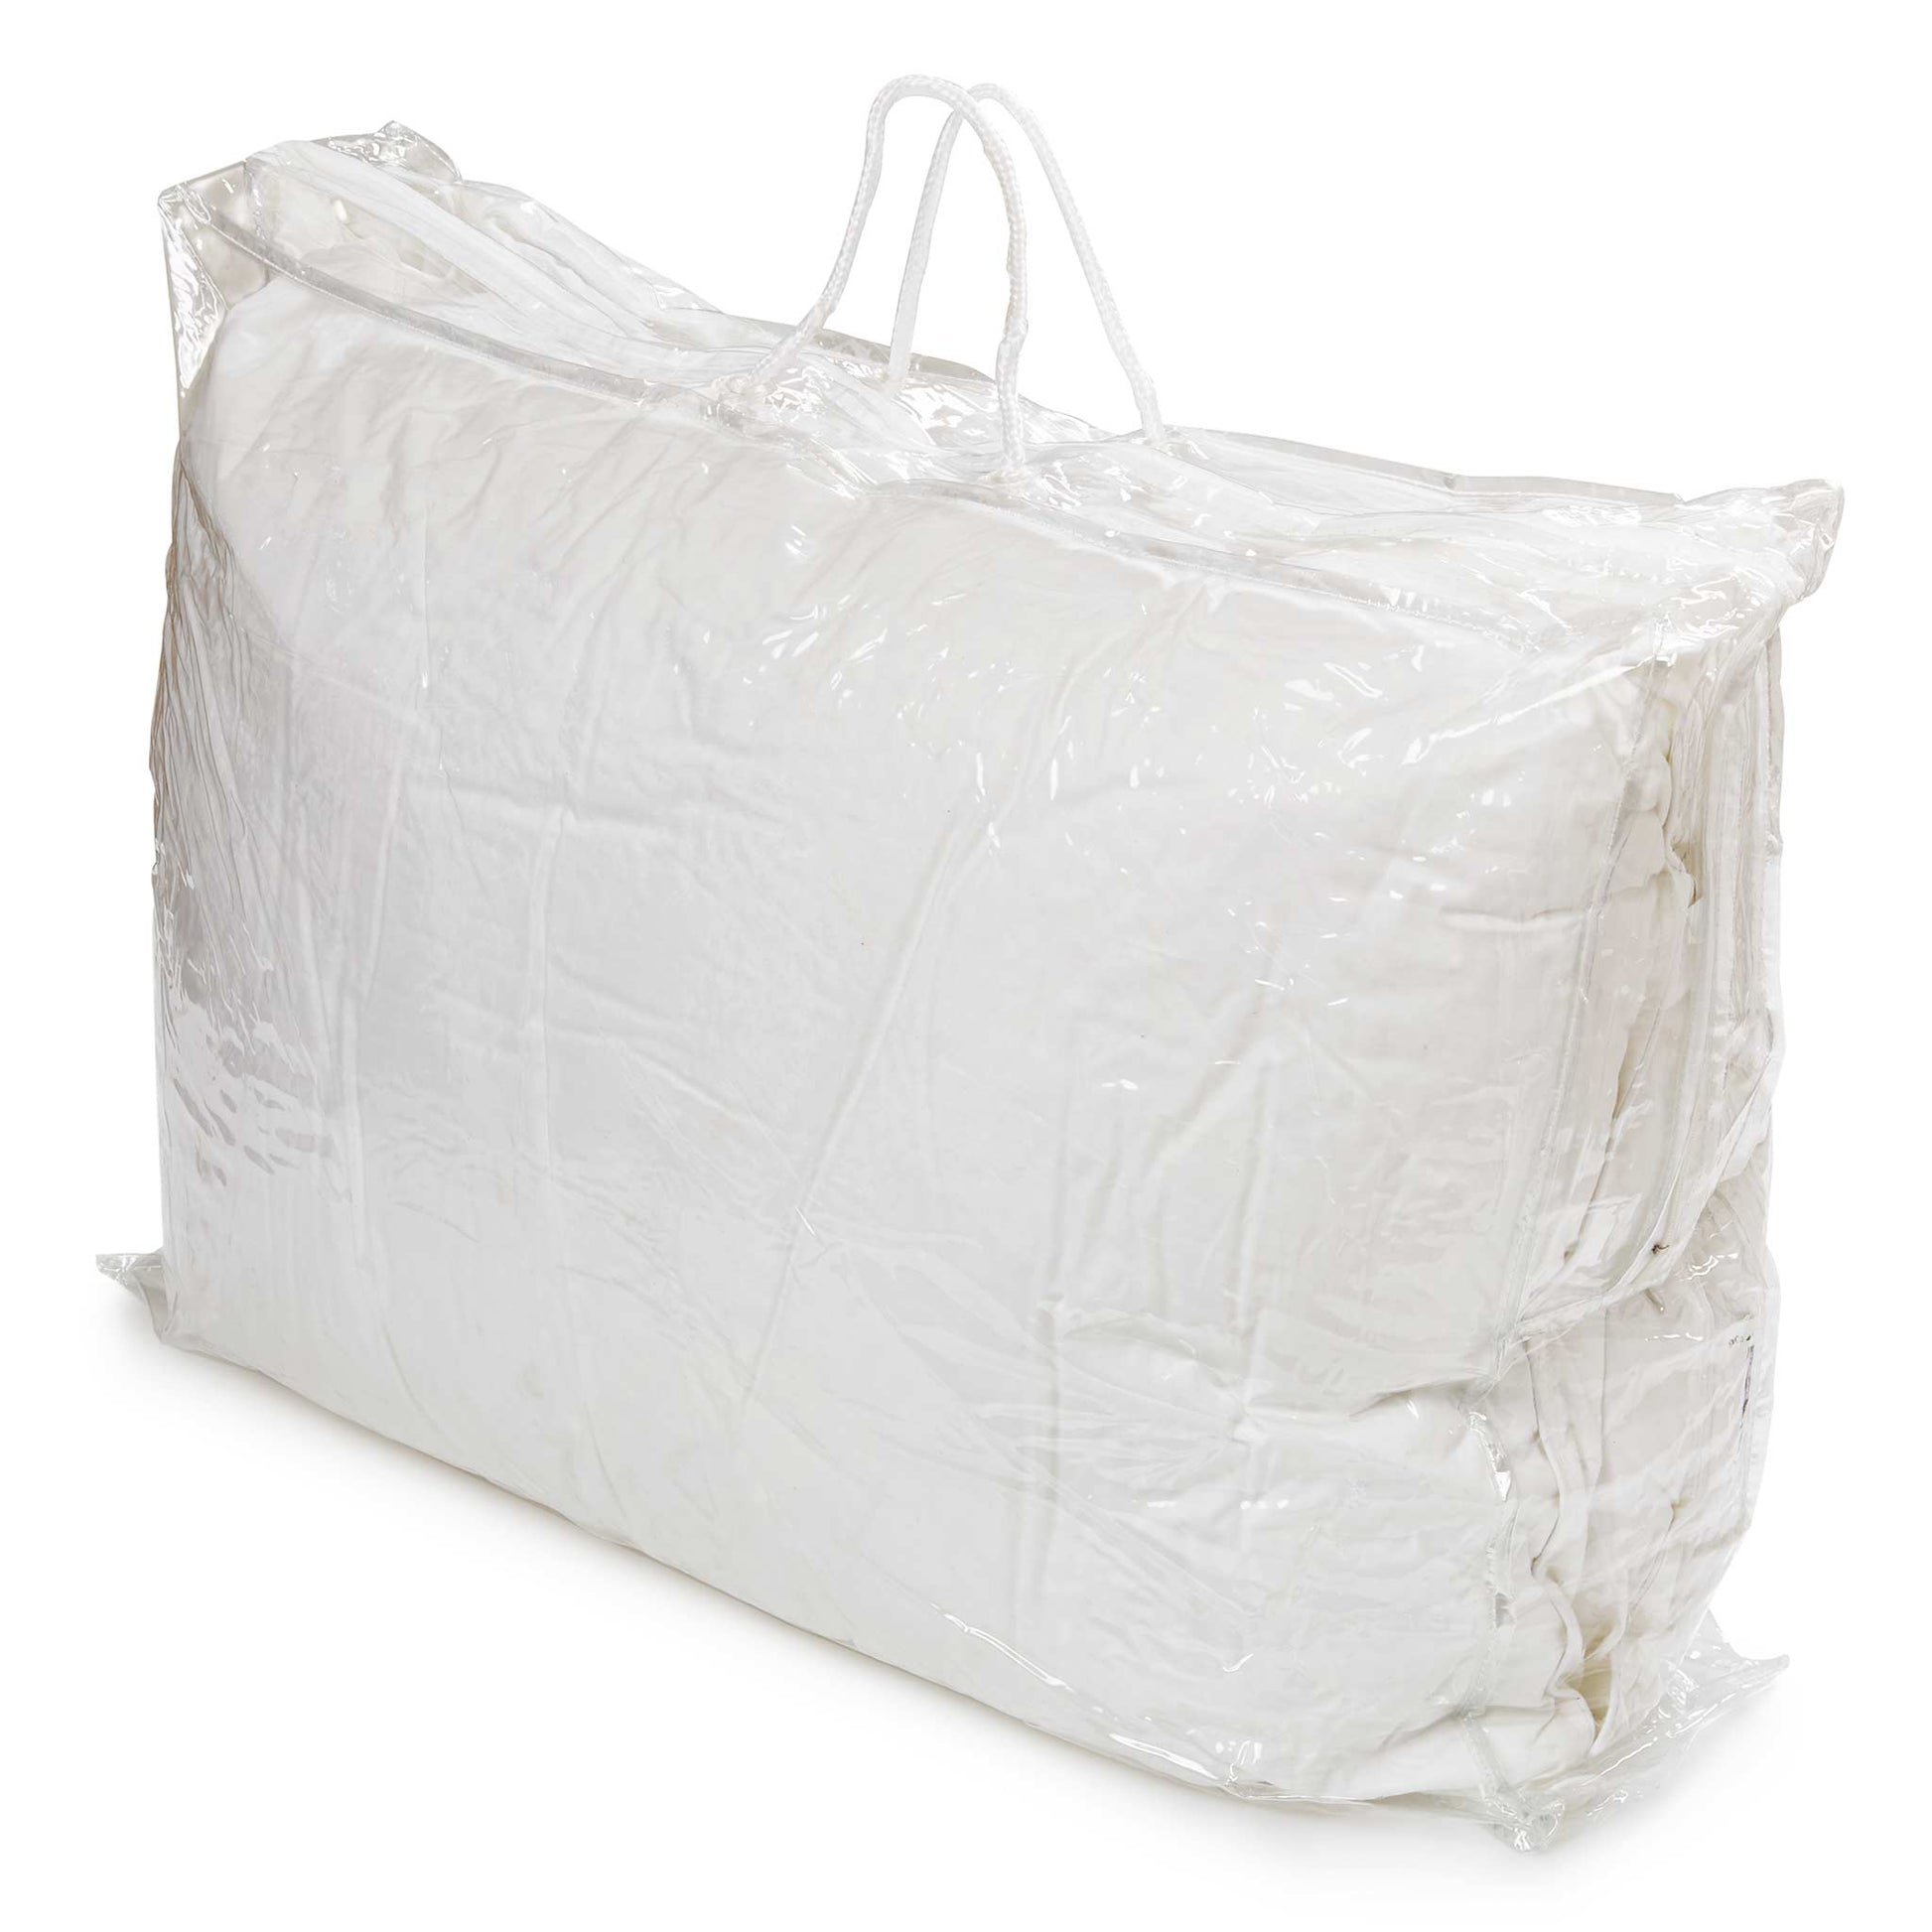 Large transparent pillow and duvet storage bag with handle